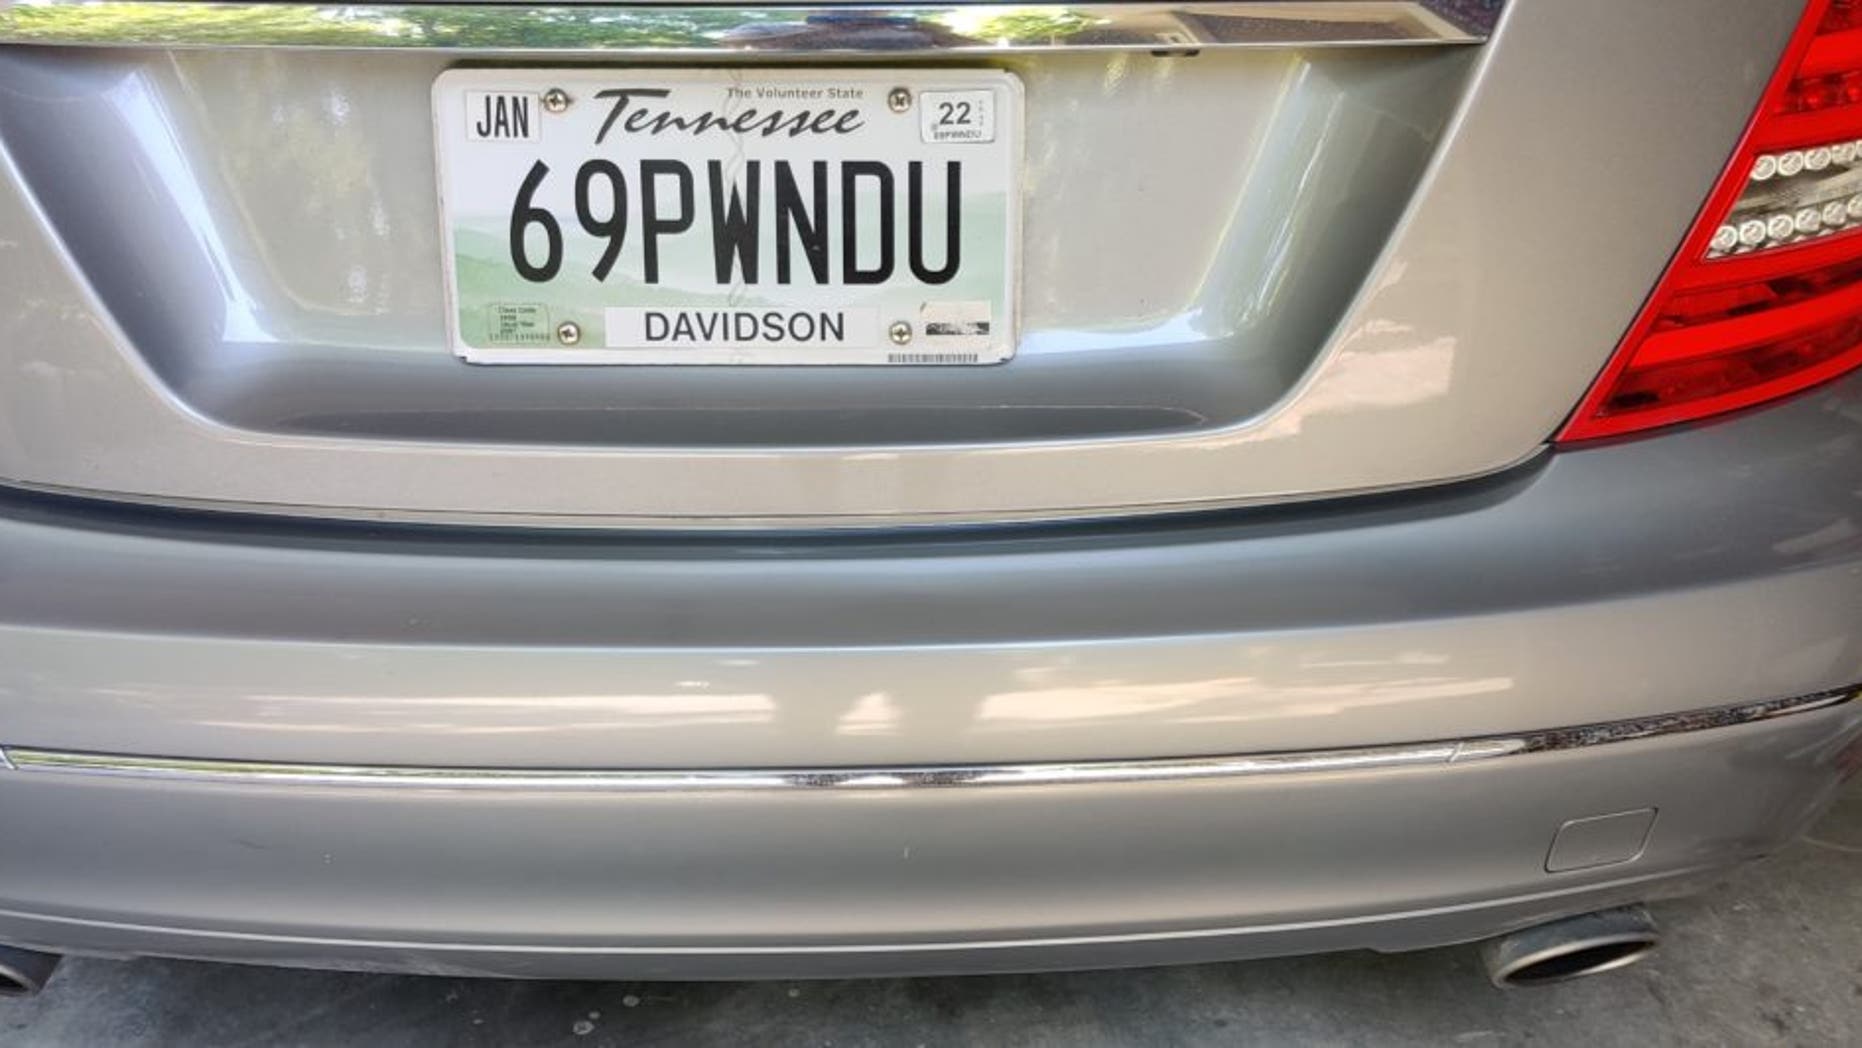 Tennessee woman sues after state officials deem vanity license plate ‘offensive’